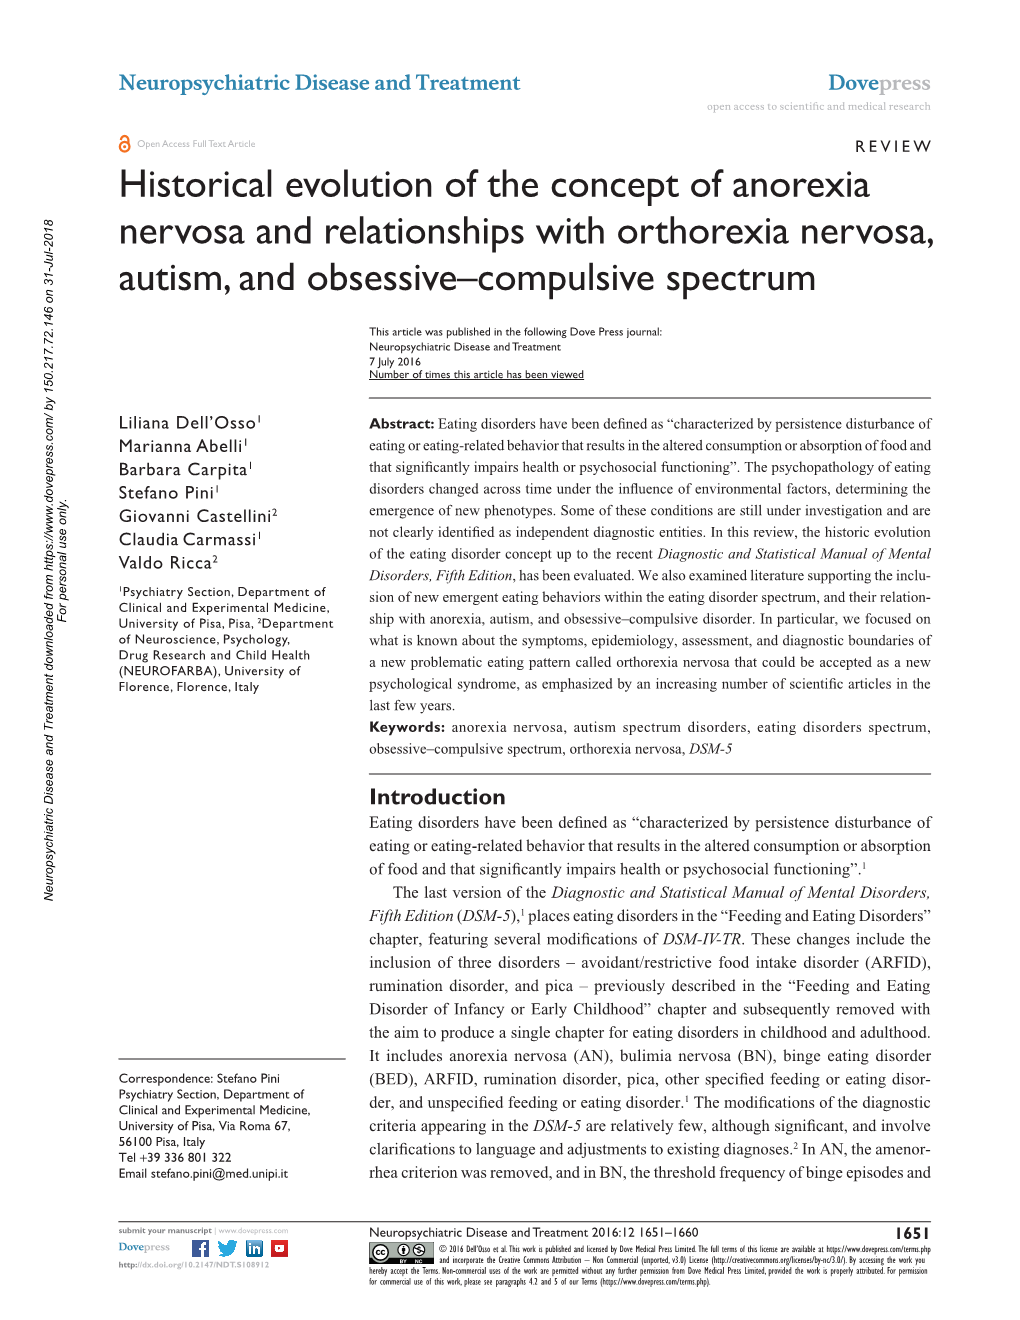 Historical Evolution of the Concept of Anorexia Nervosa and Relationships with Orthorexia Nervosa, Autism, and Obsessive–Compulsive Spectrum